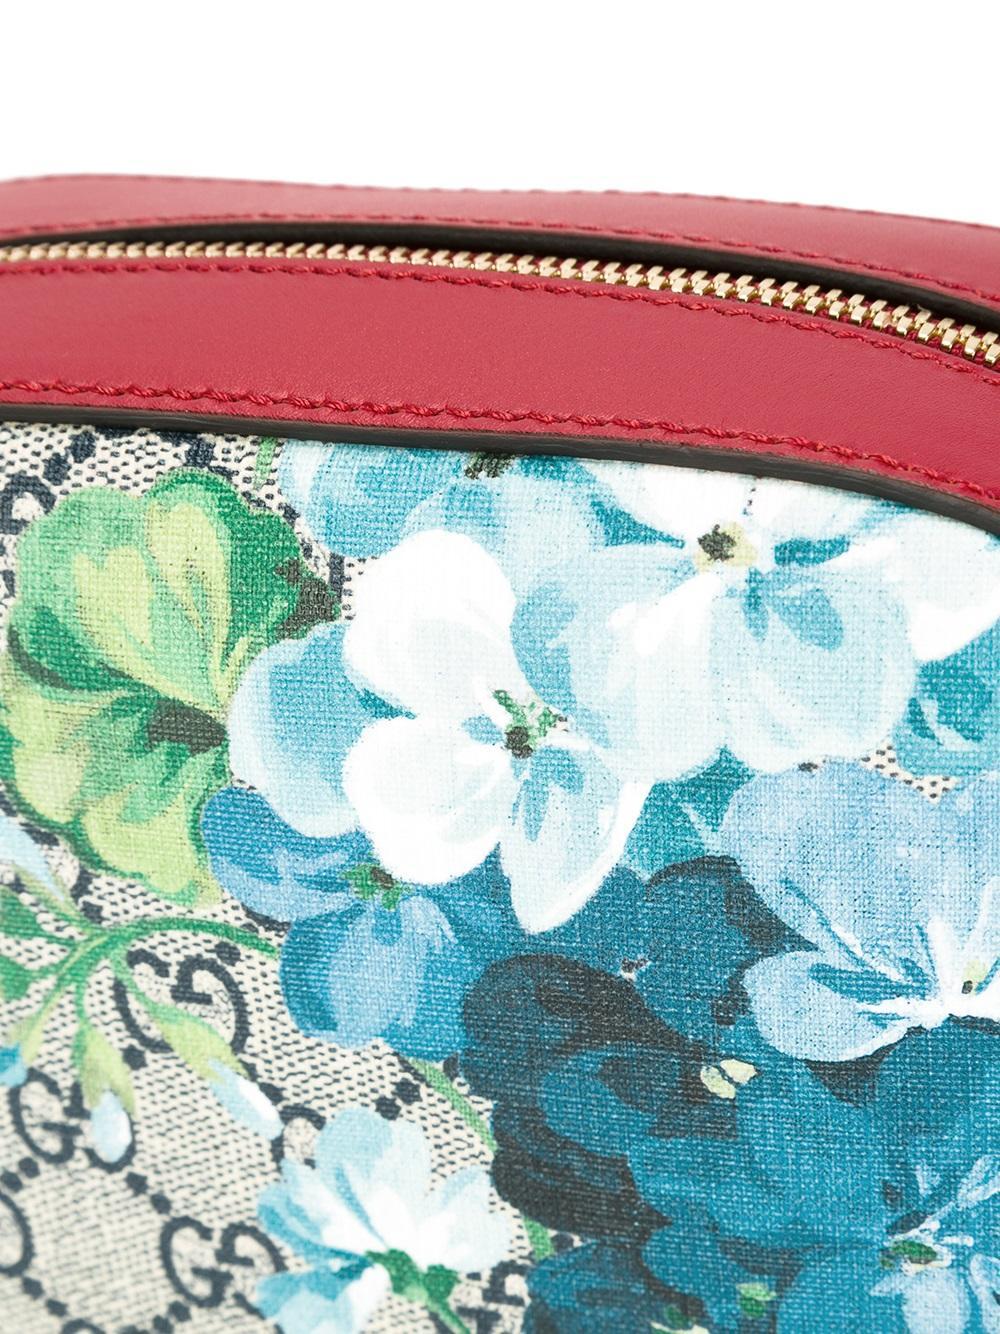 Gucci, Bags, Authentic Gucci Bloom Bag Crossbody Red Blue Flowers